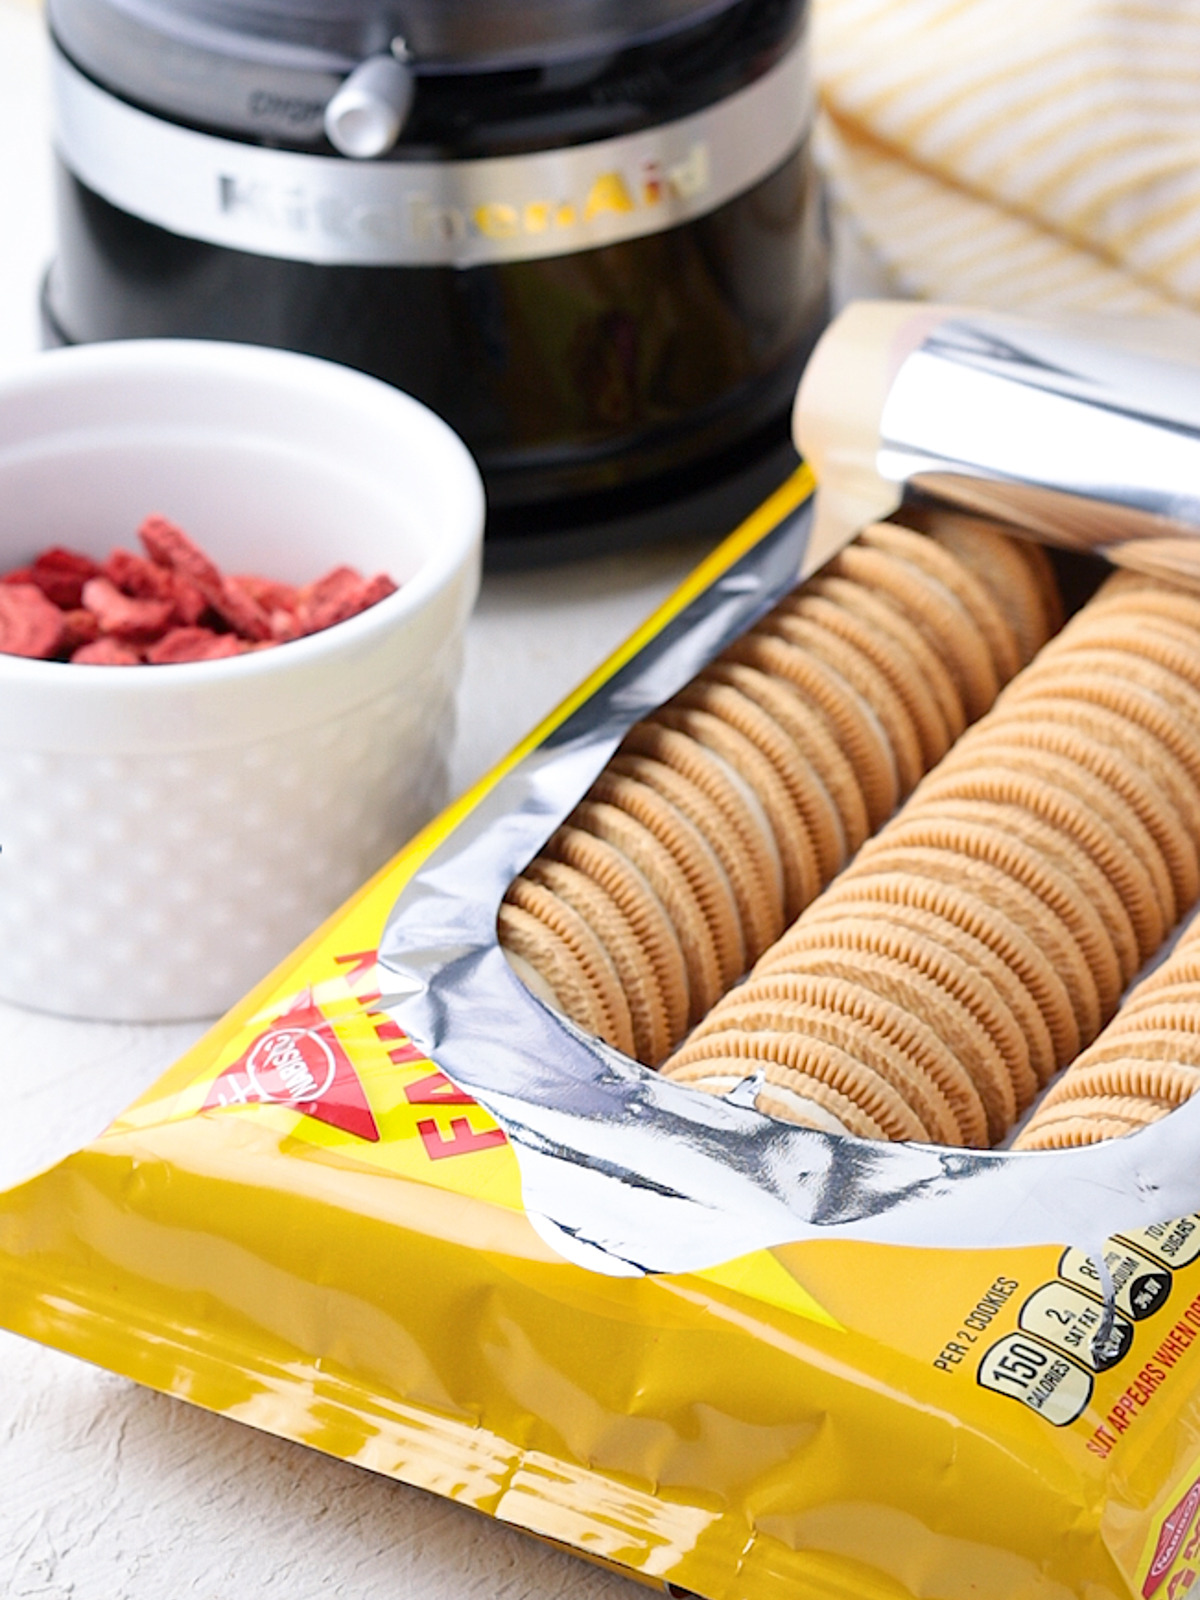 Ingredients for Strawberry Crunch Topping: Golden Oreos, freeze-dried strawberries, and butter.